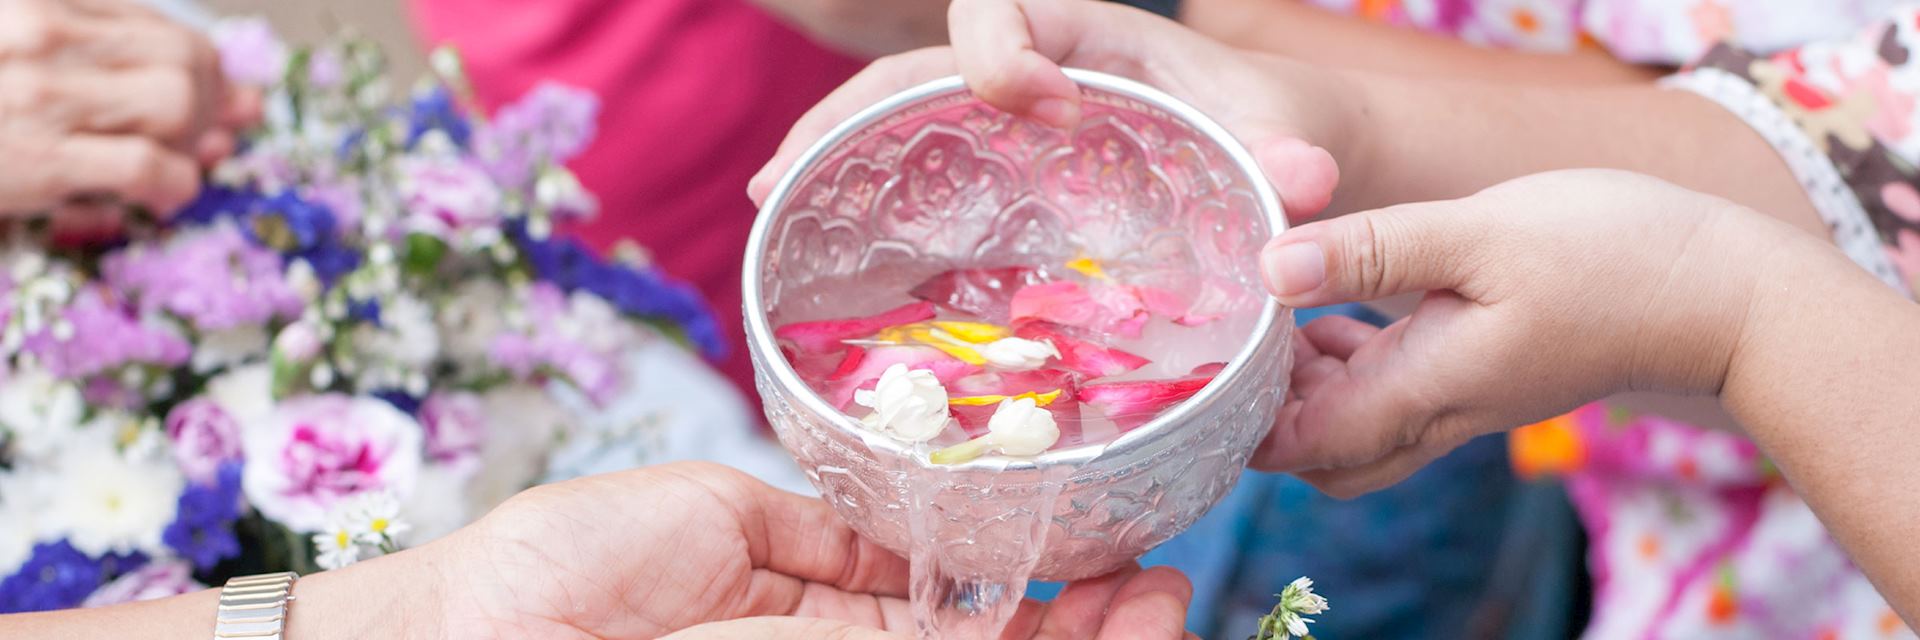 Songkran ceremony for the Thai New Year